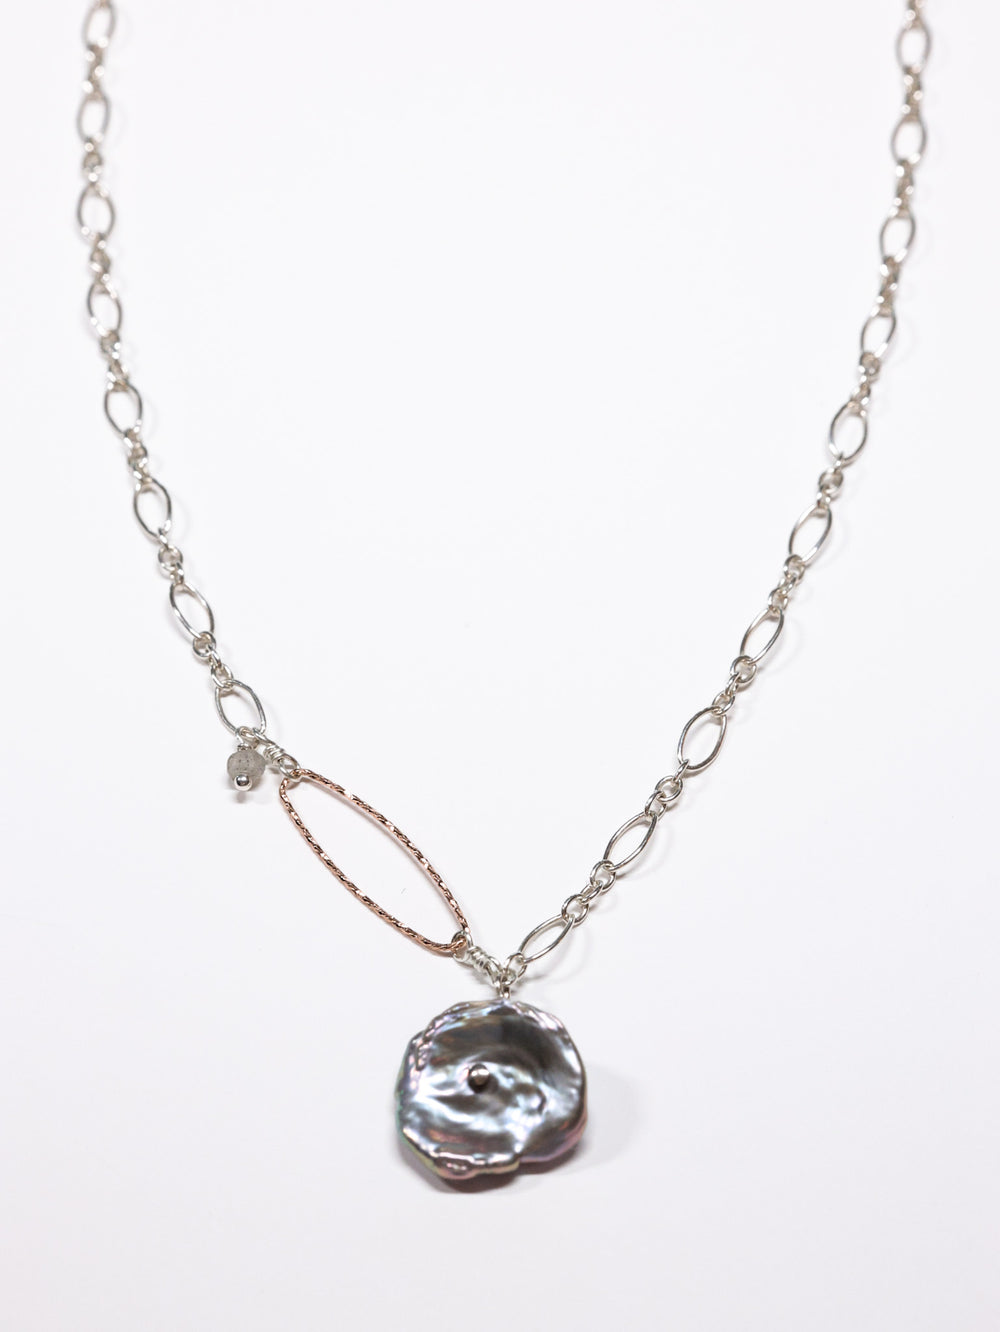 Grey Peacock Keshi freshwater pearl nh necklace -silver and rose gold